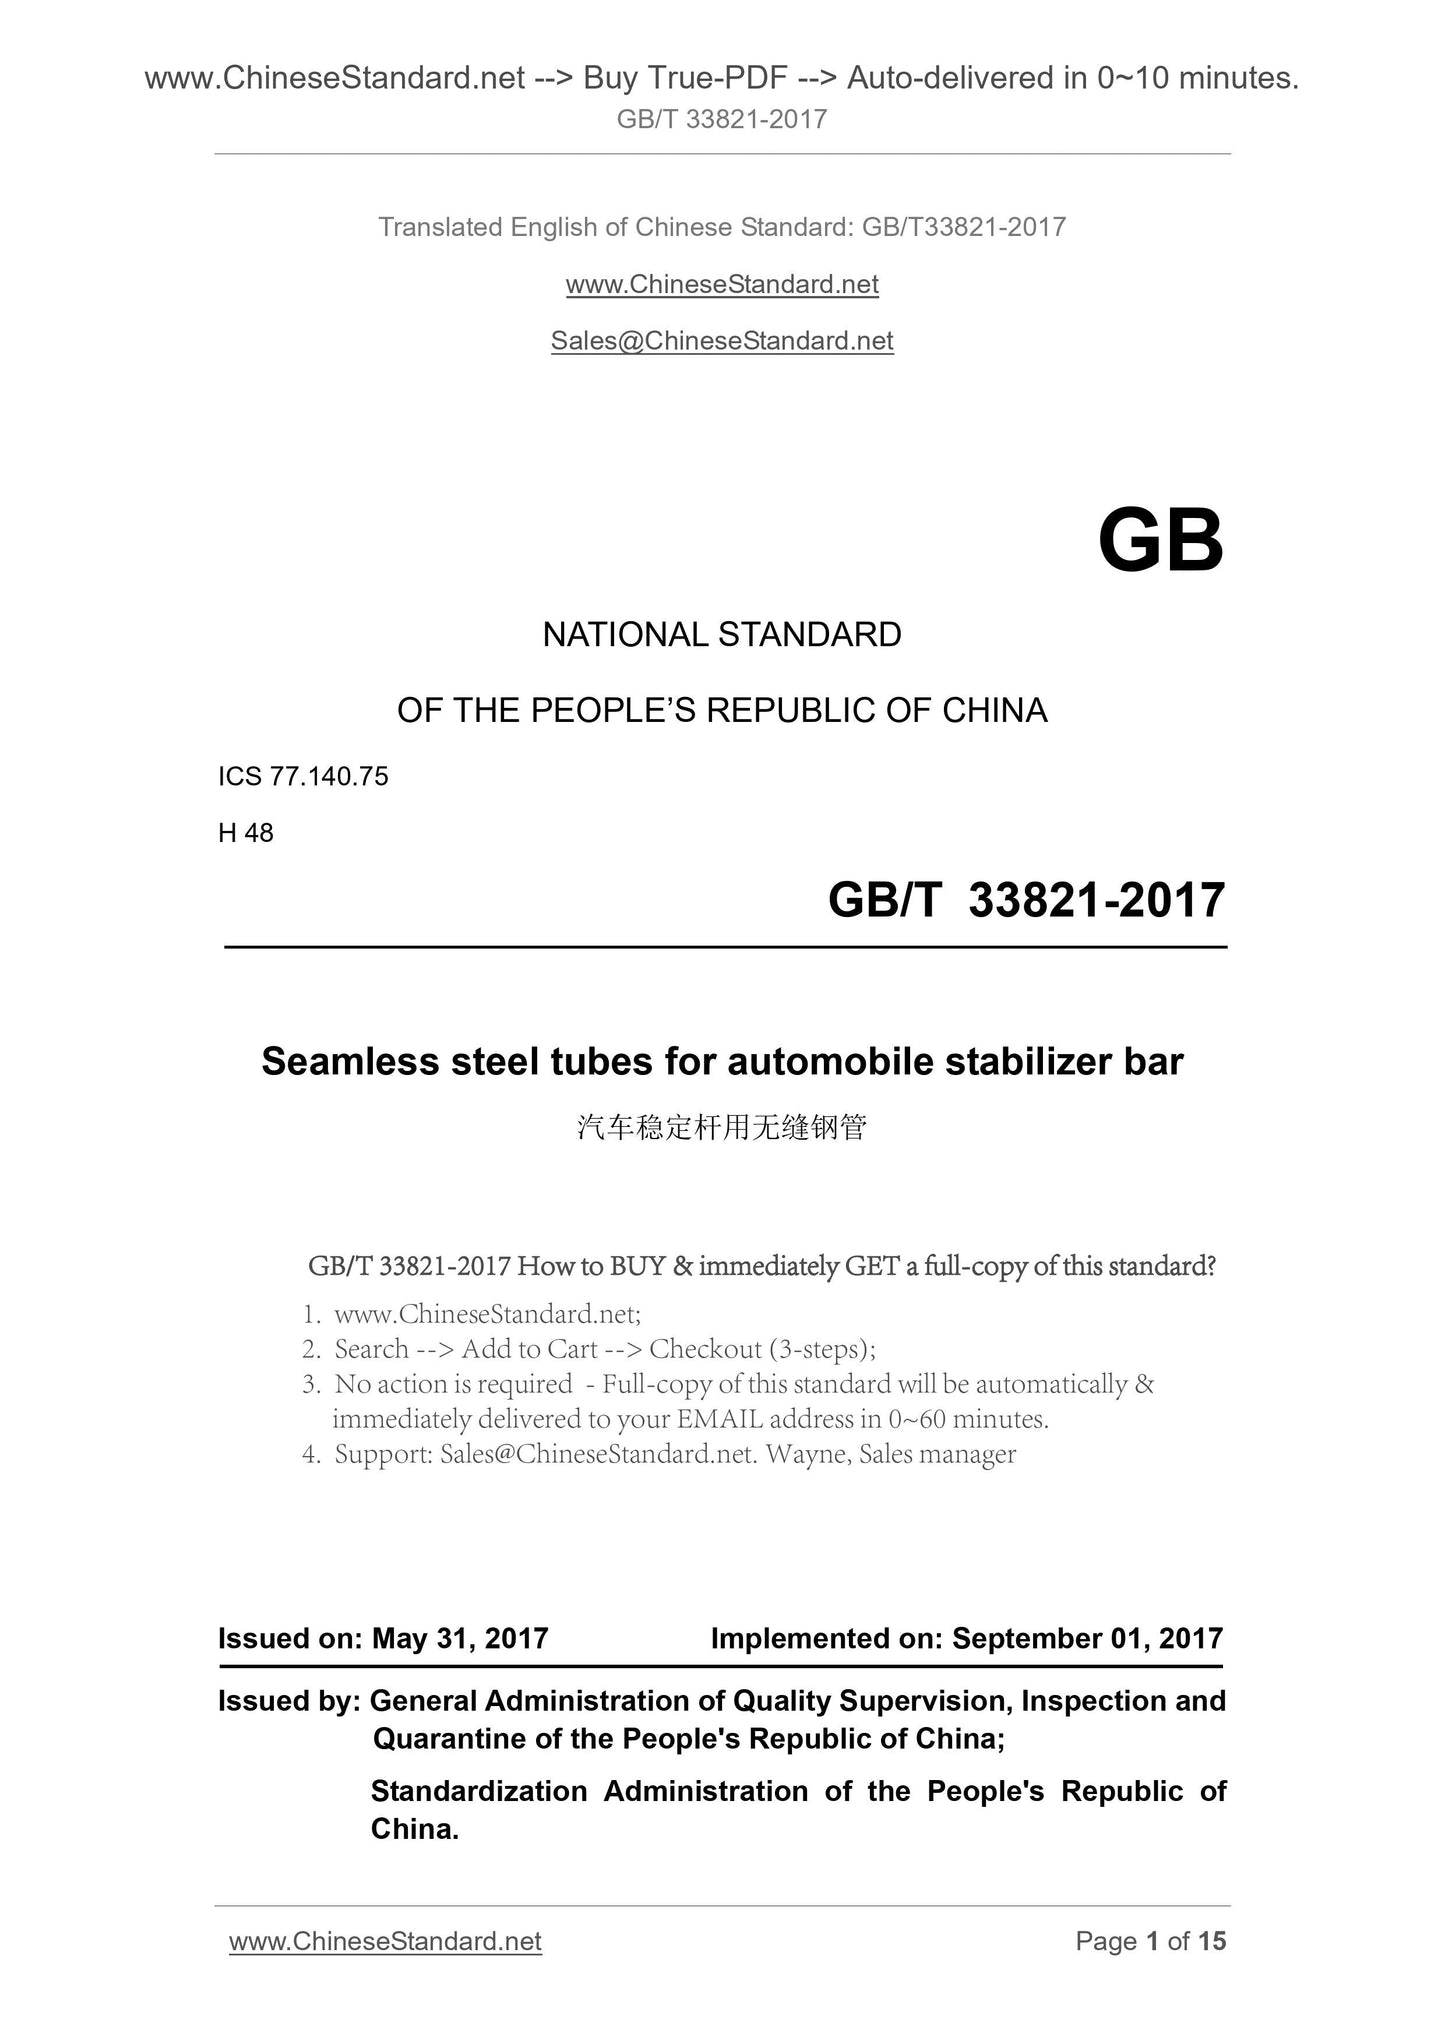 GB/T 33821-2017 Page 1